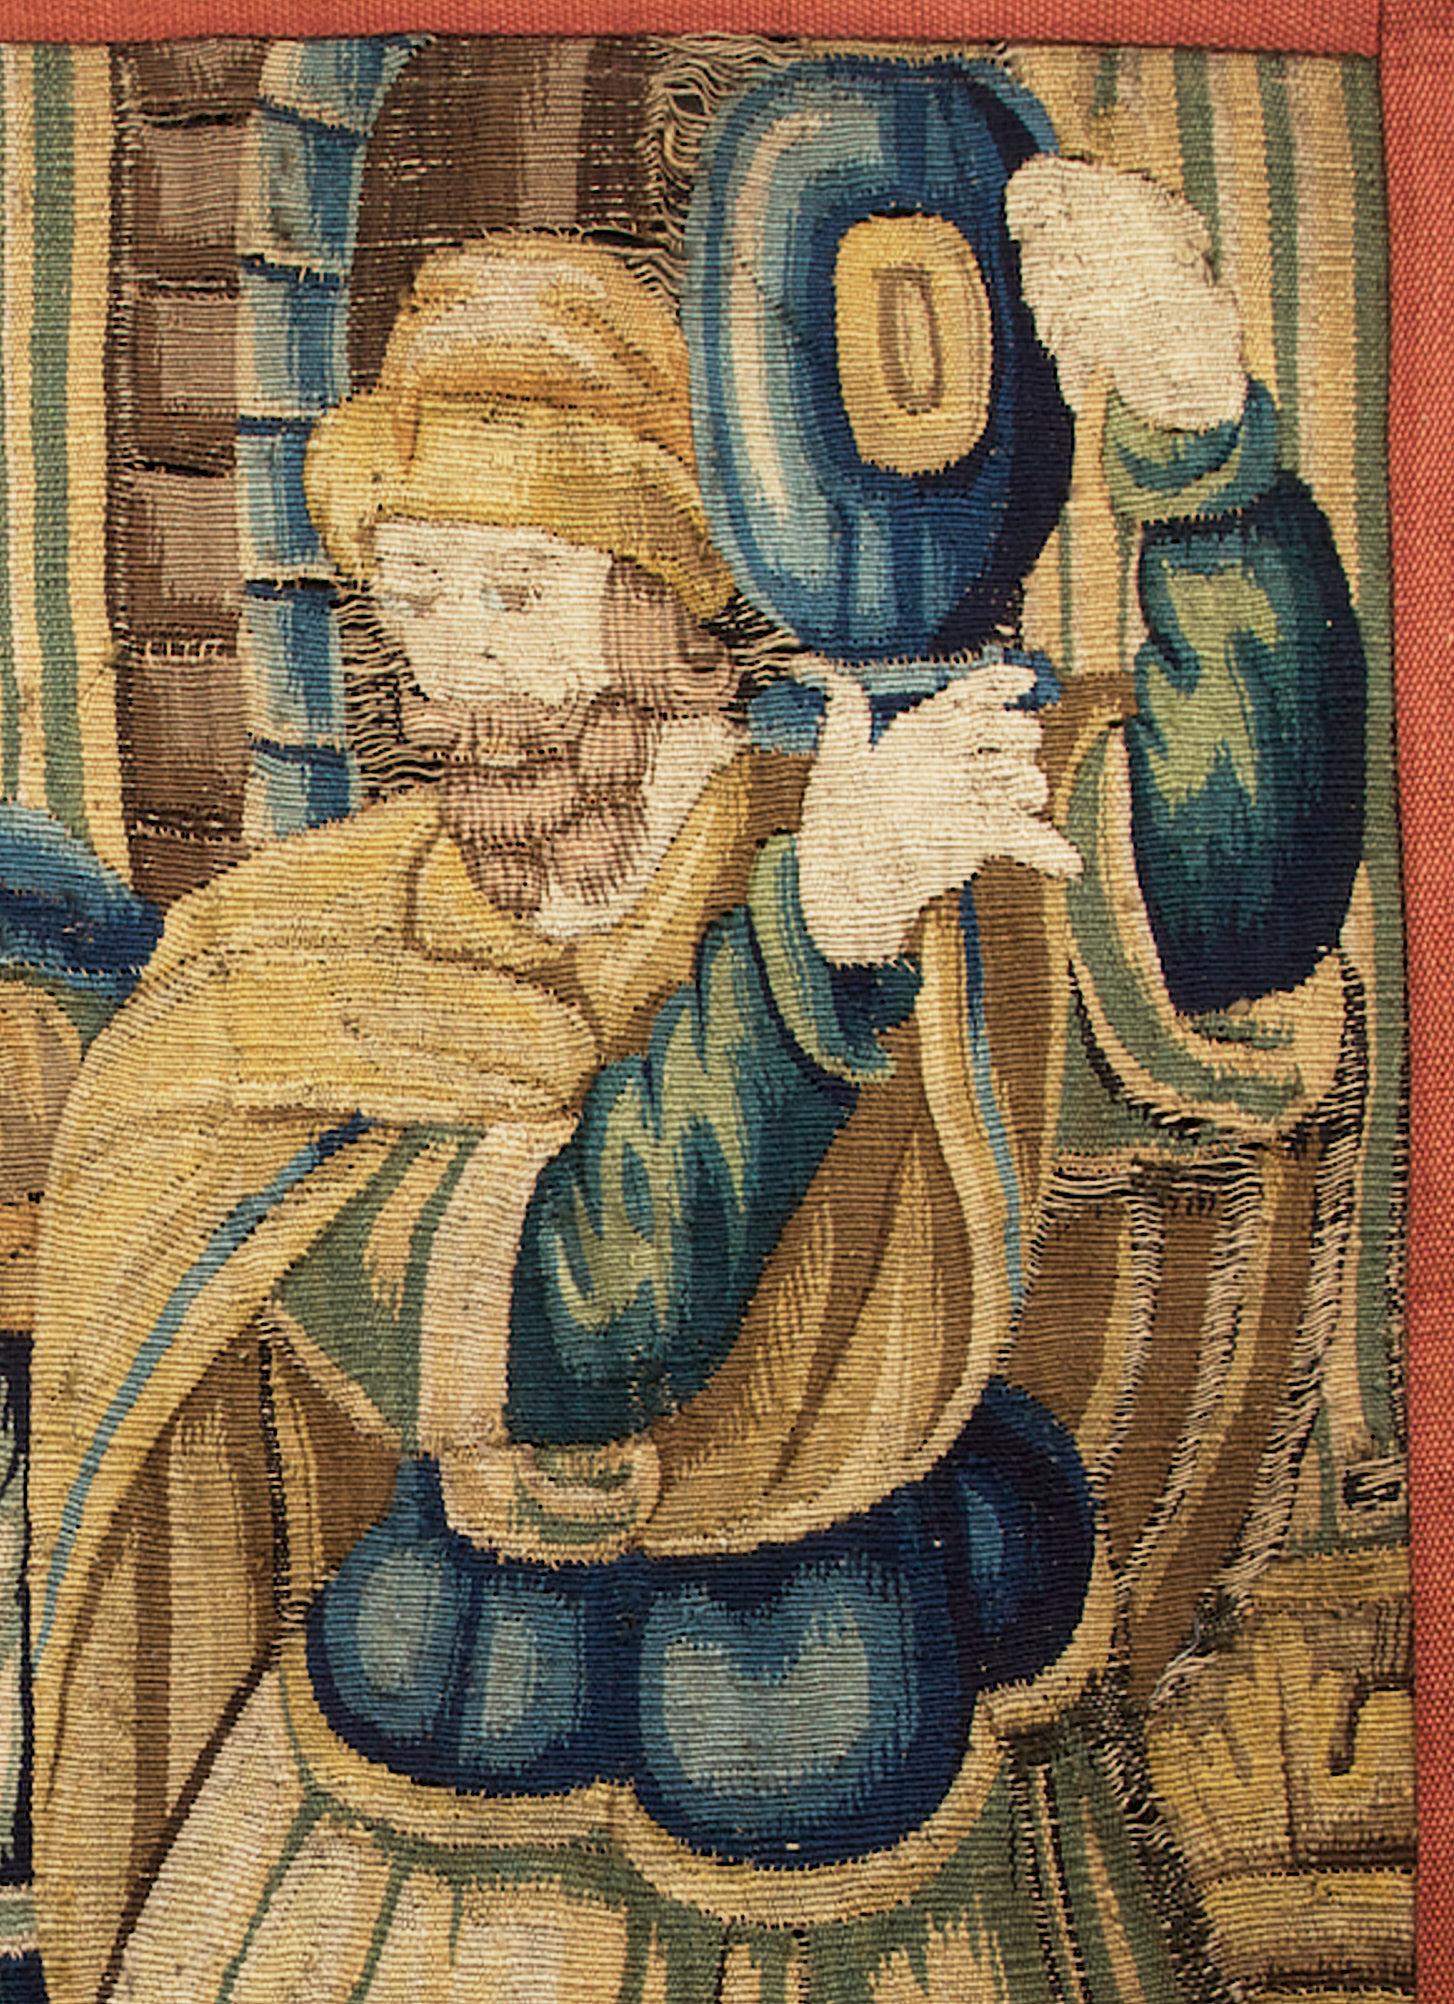 Late 16th century Section of Tapestry, Brussels, circa 1600.

The Tapestry with three figures, carrying fruit, an urn and one crowned, possibly a scene of the adoration.

The scene removed from a larger original Tapestry.
  